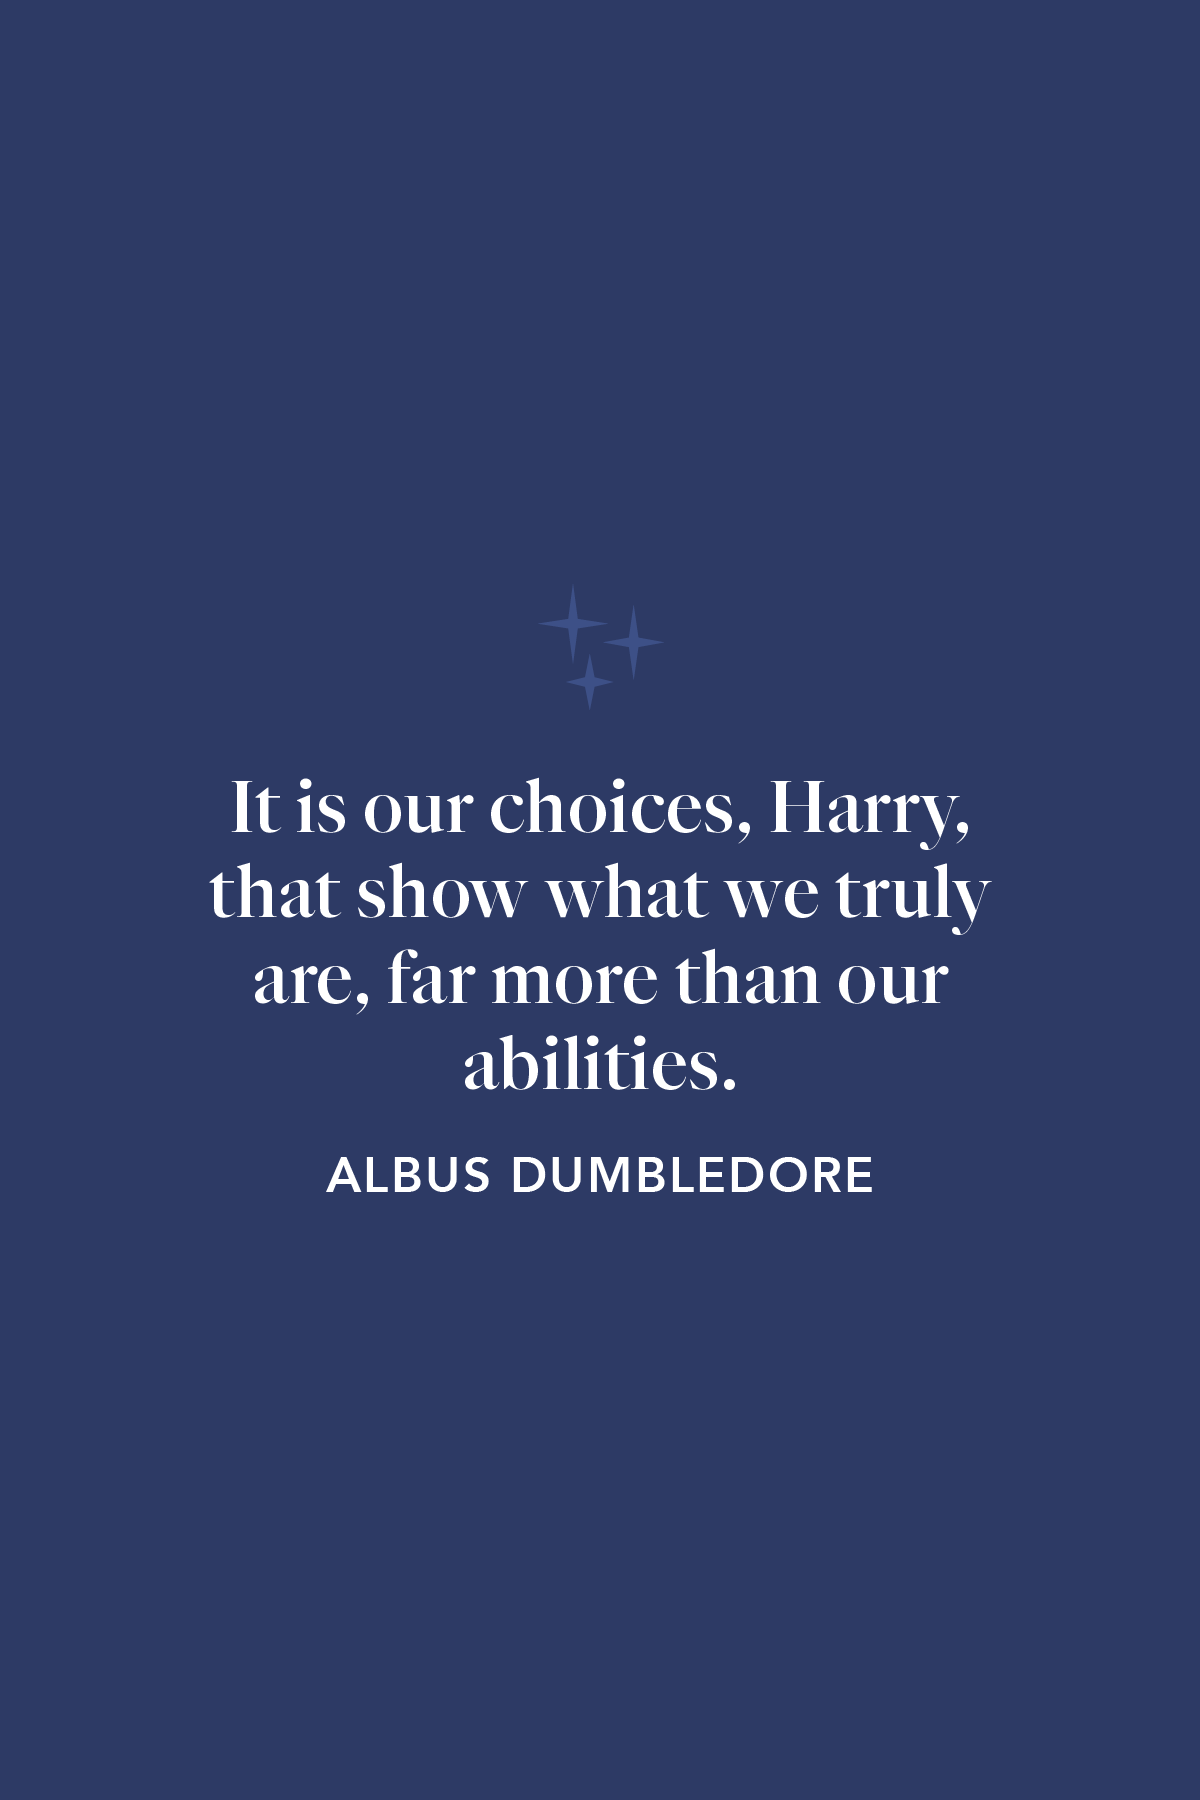 40 Inspiring Harry Potter Quotes From Dumbledore, Hermione, More